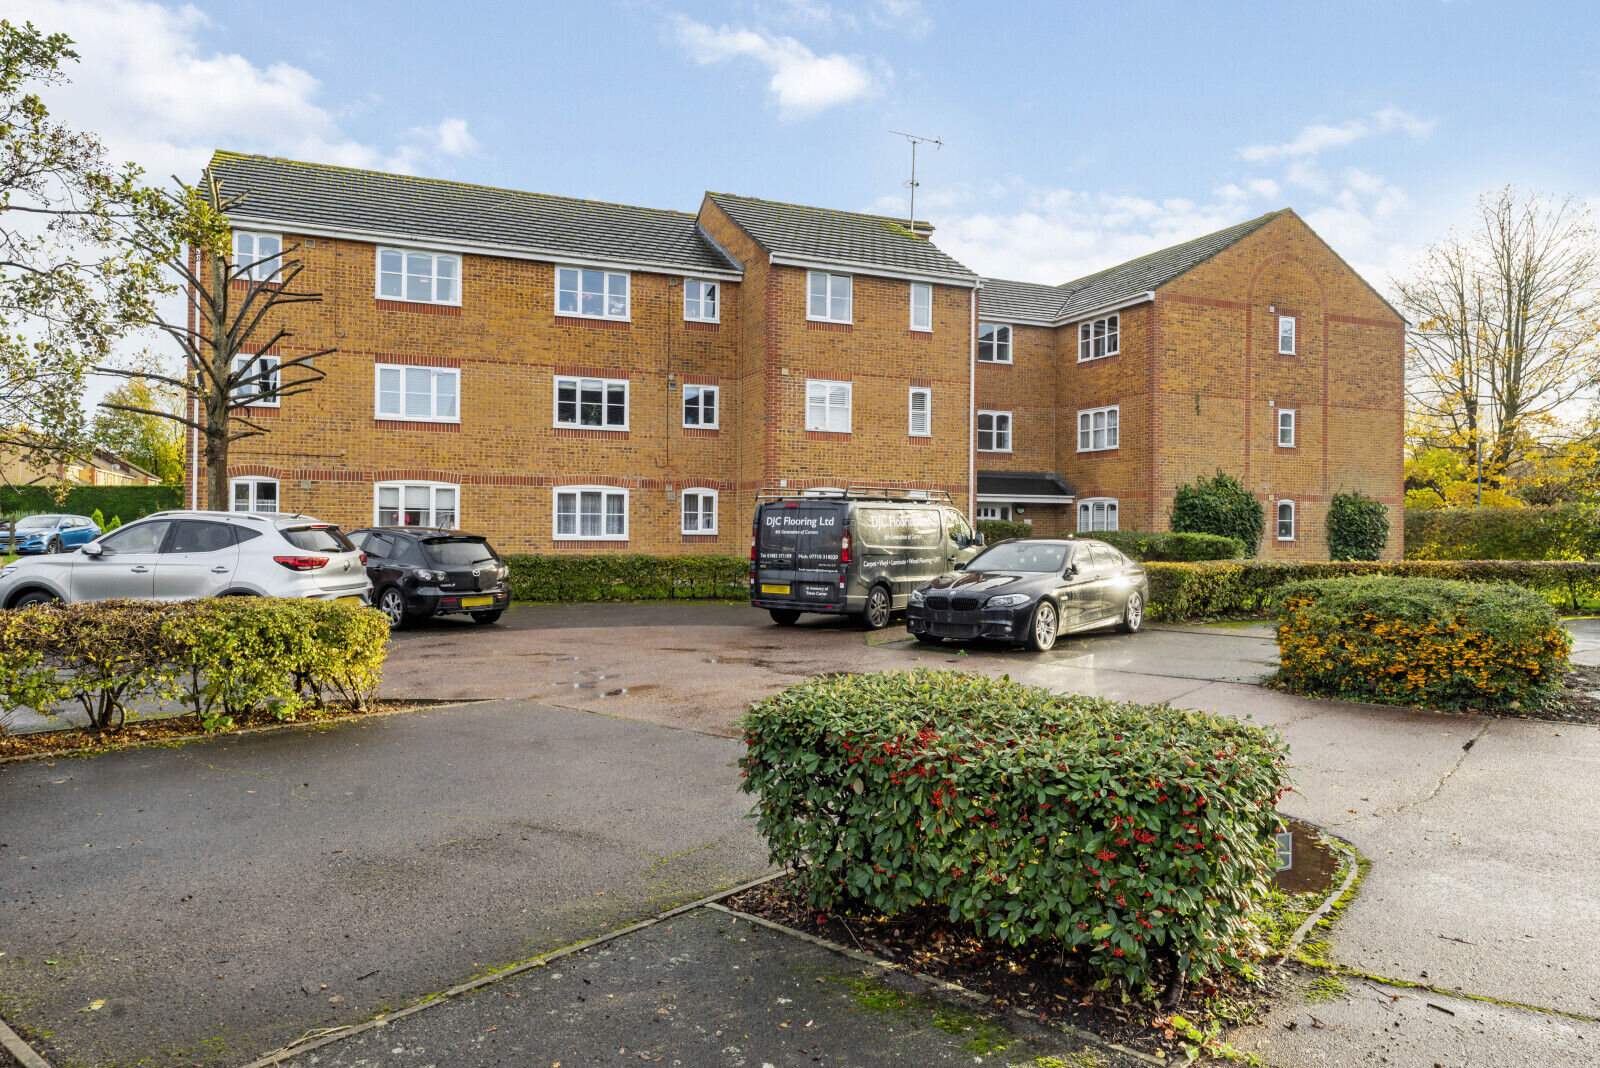 2 bedroom  flat to rent, Available now Mullards Close, Mitcham, CR4, main image